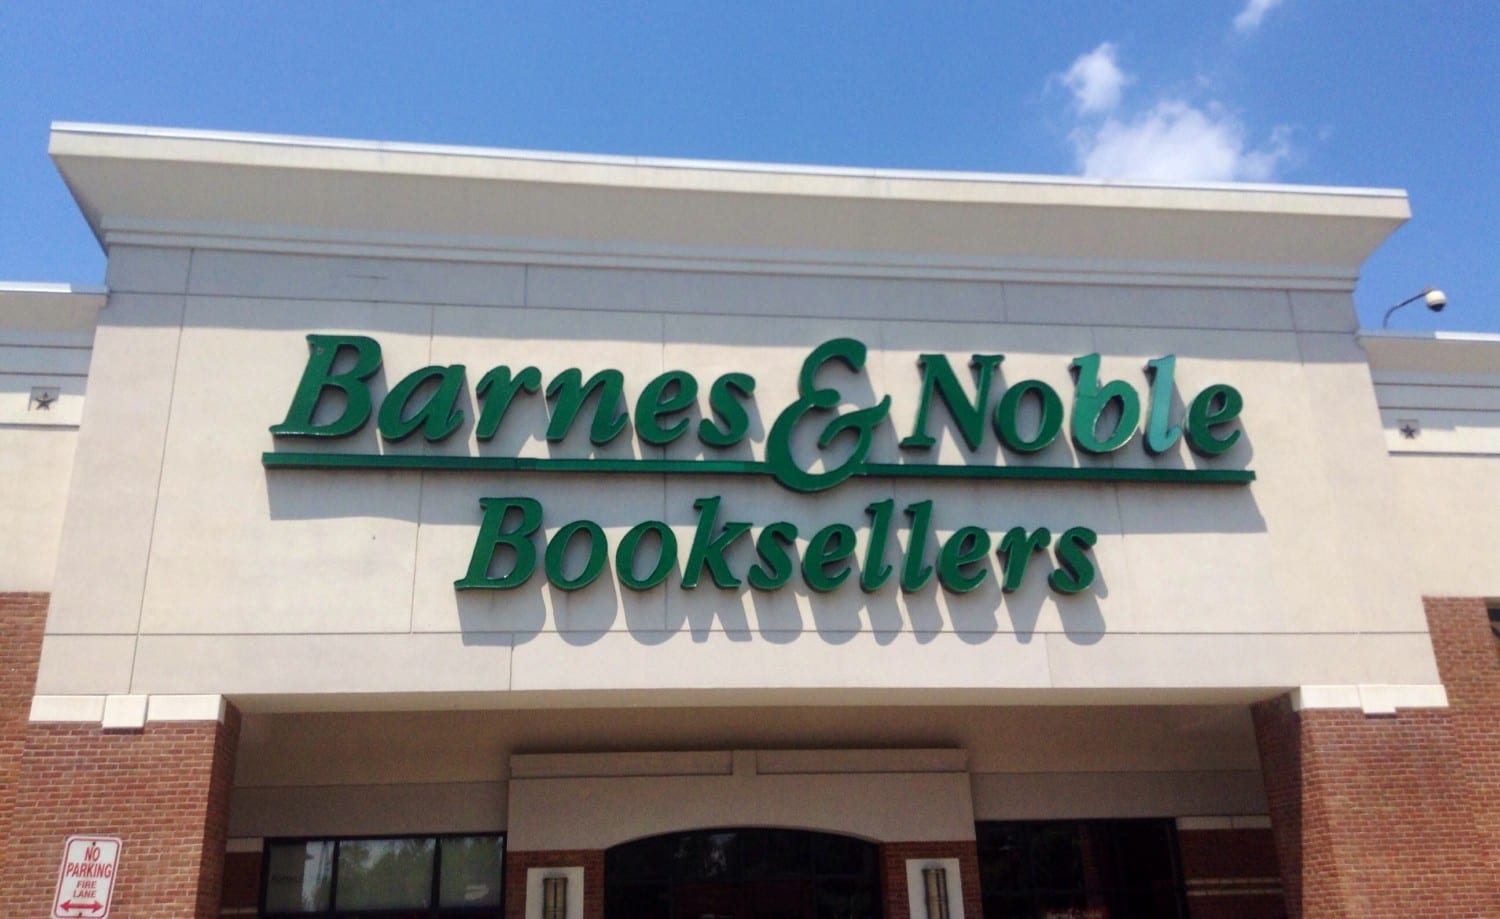 Barnes & Noble Booksellers, Barnes and Noble Book Store. 6/2014 Waterbury Connecticut. Pics by Mike Mozart of TheToyChannel and JeepersMedia on YouTube. #Barnes&Noble #BarnesAndNoble #Barnes #Noble #Booksellers #Bookstore